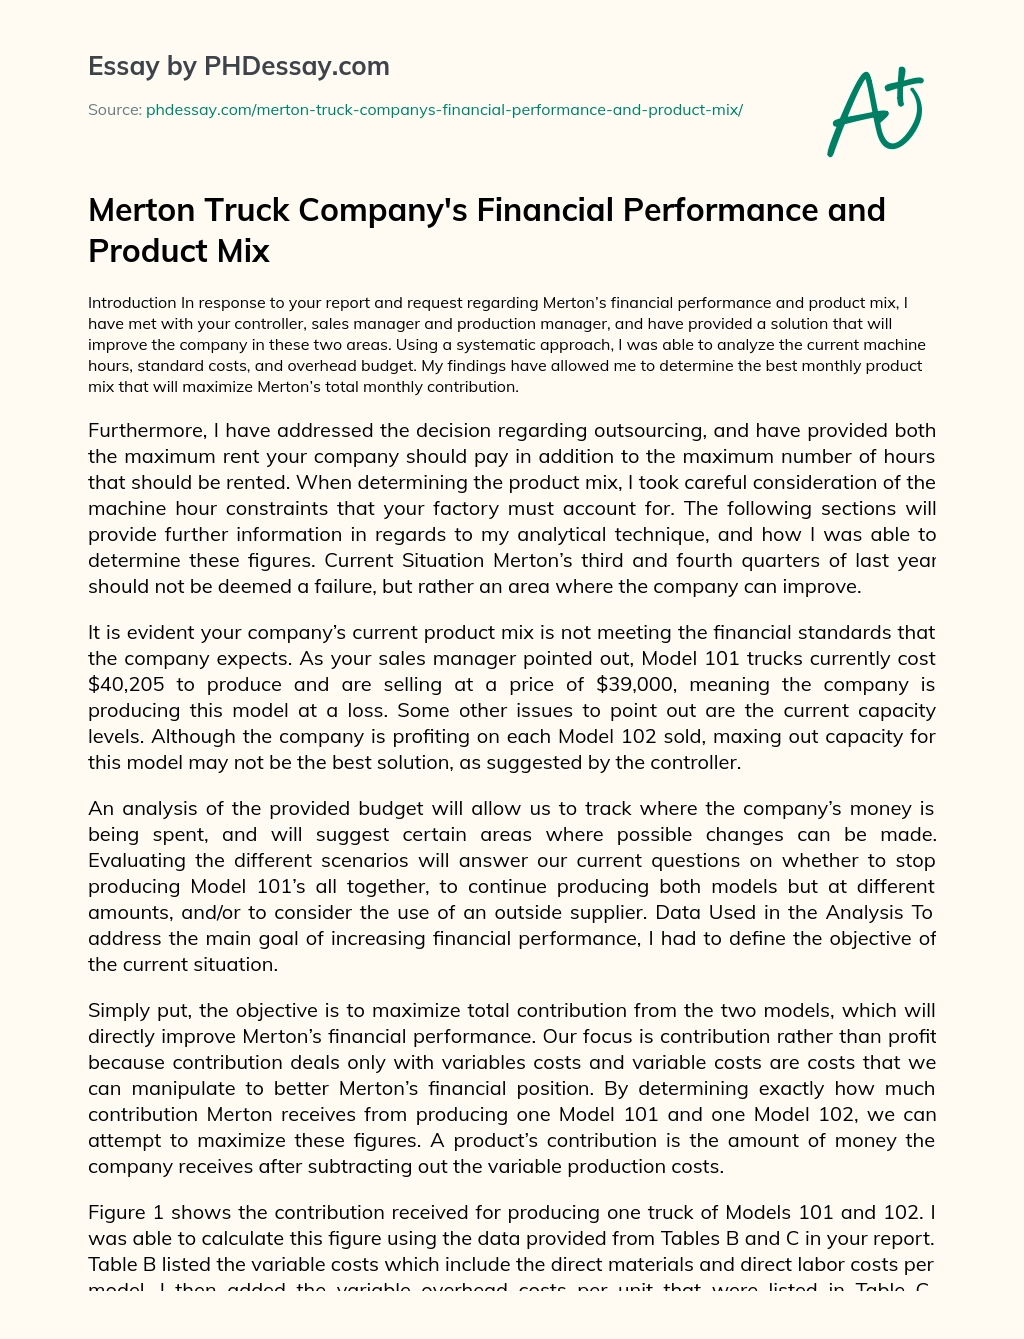 Merton Truck Company’s Financial Performance and Product Mix essay